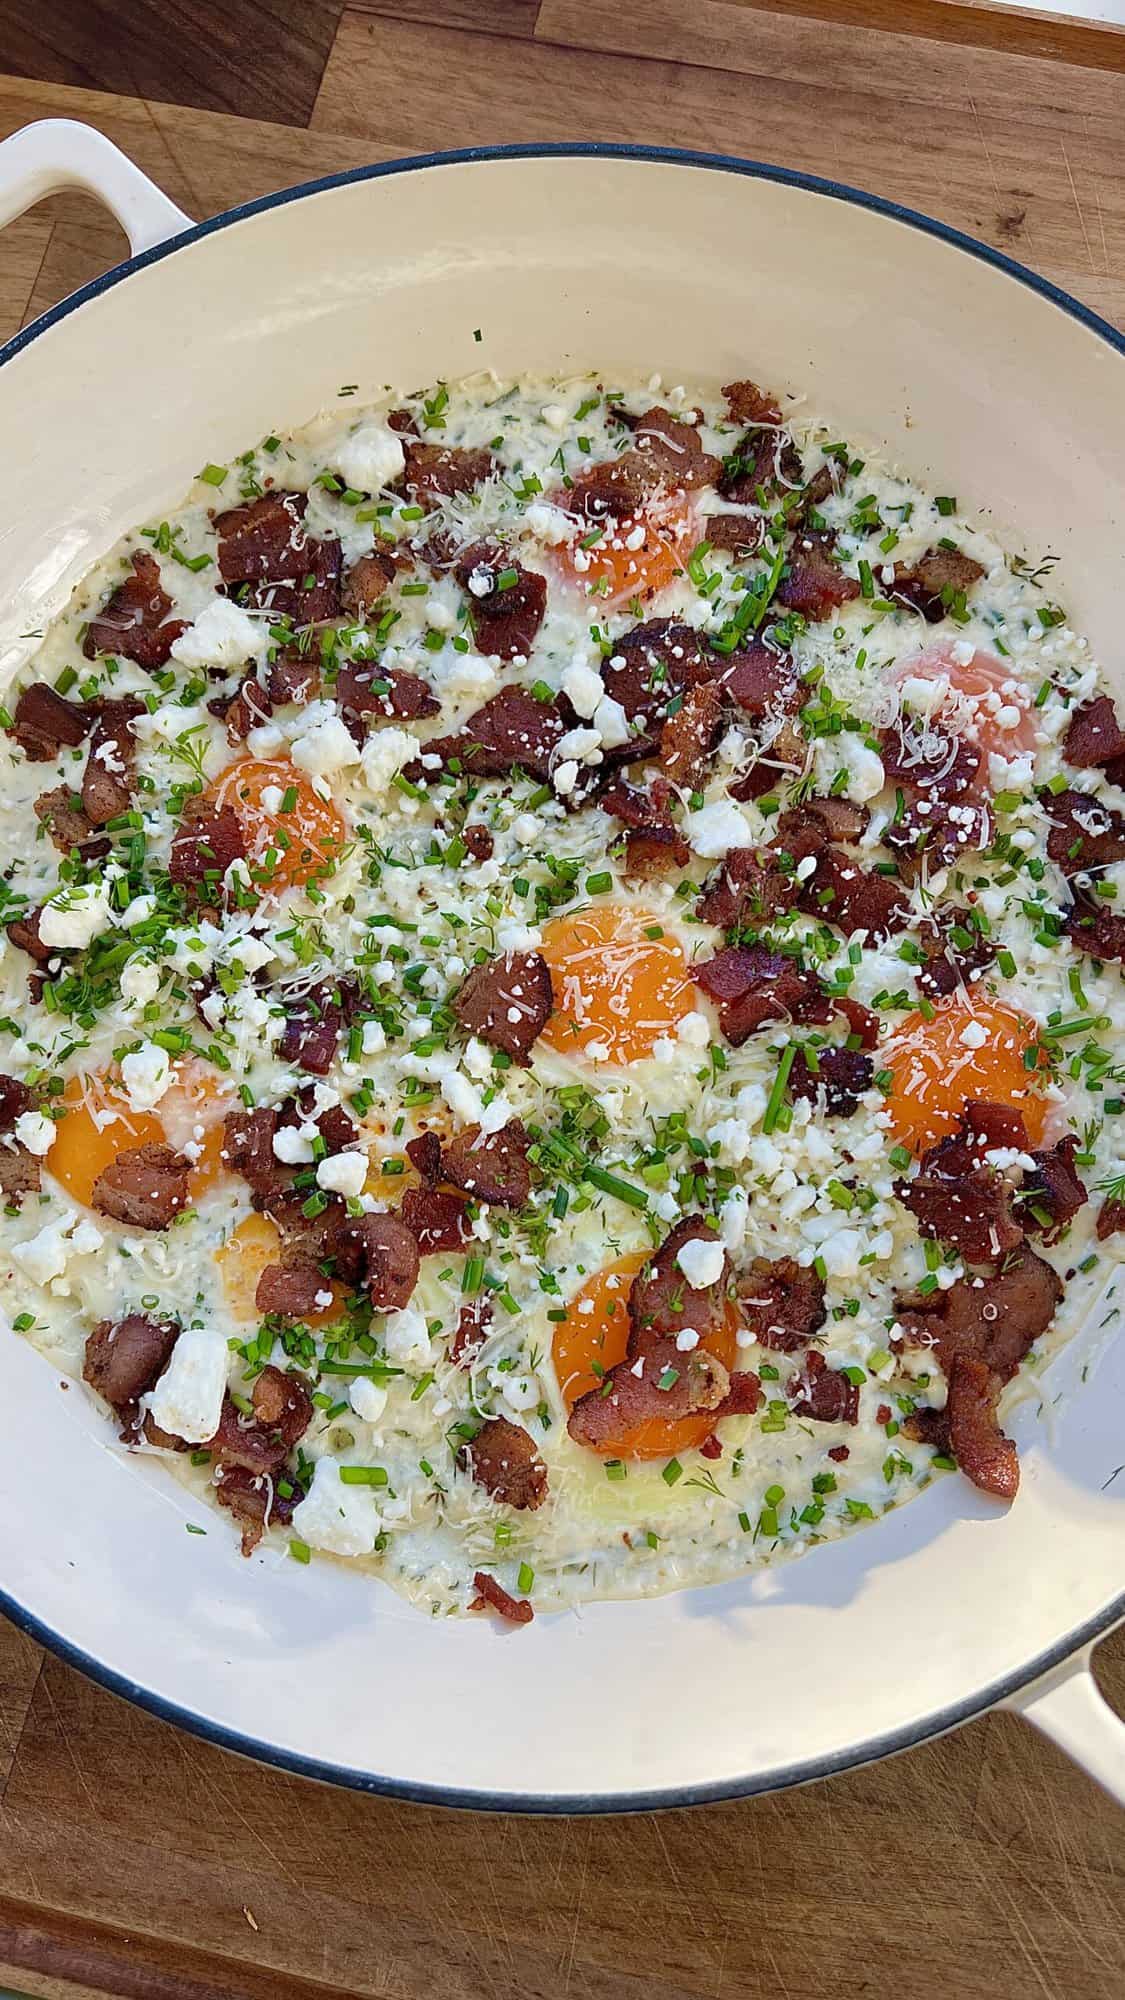 A skillet breakfast made with heavy cream, sour cream, bacon, garlic, and fresh herbs.